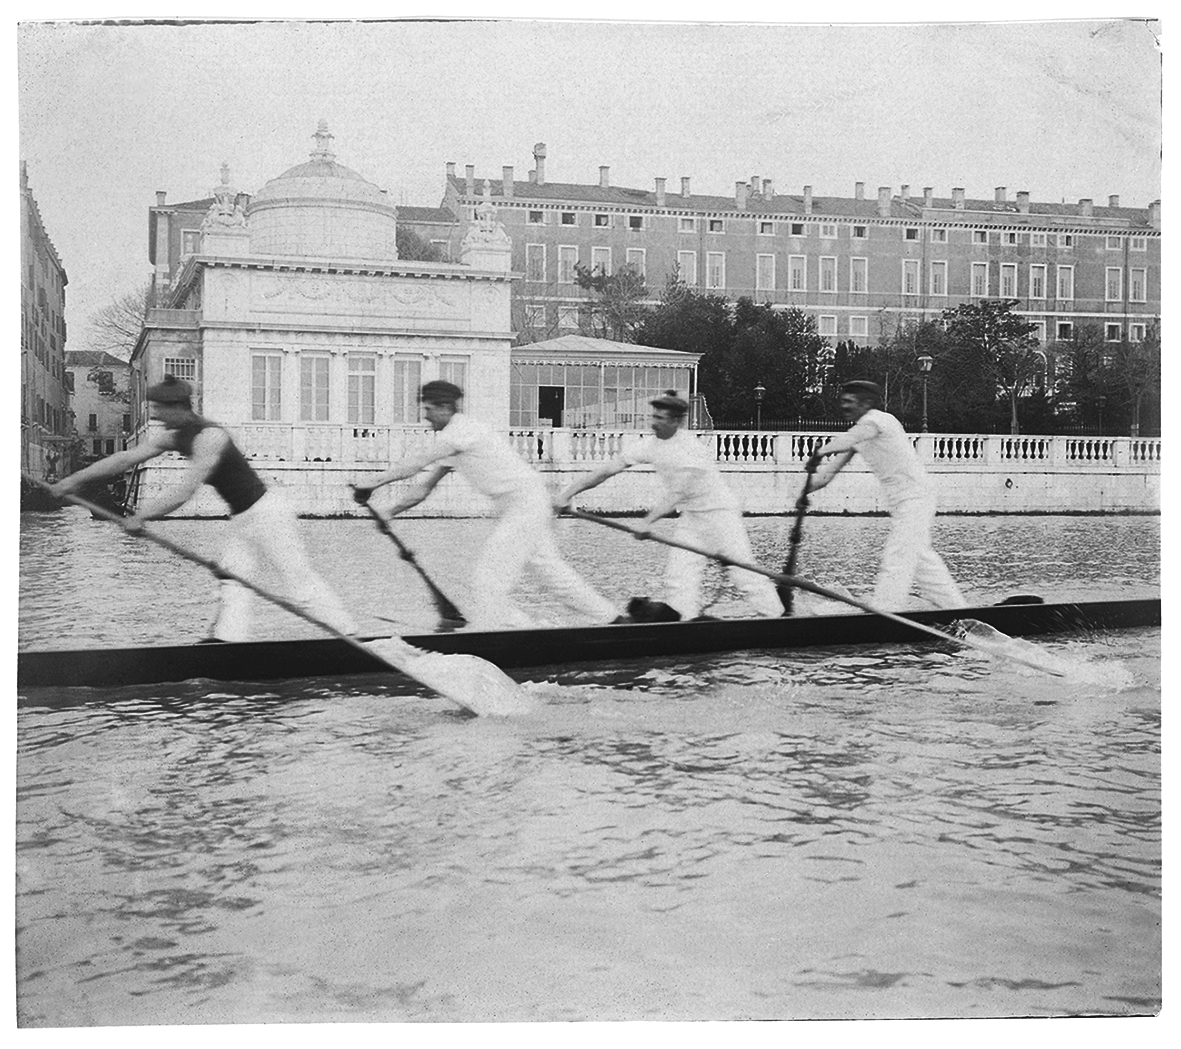 Rowers, historical photograph, private collection Cynthia Giard Préfontaine